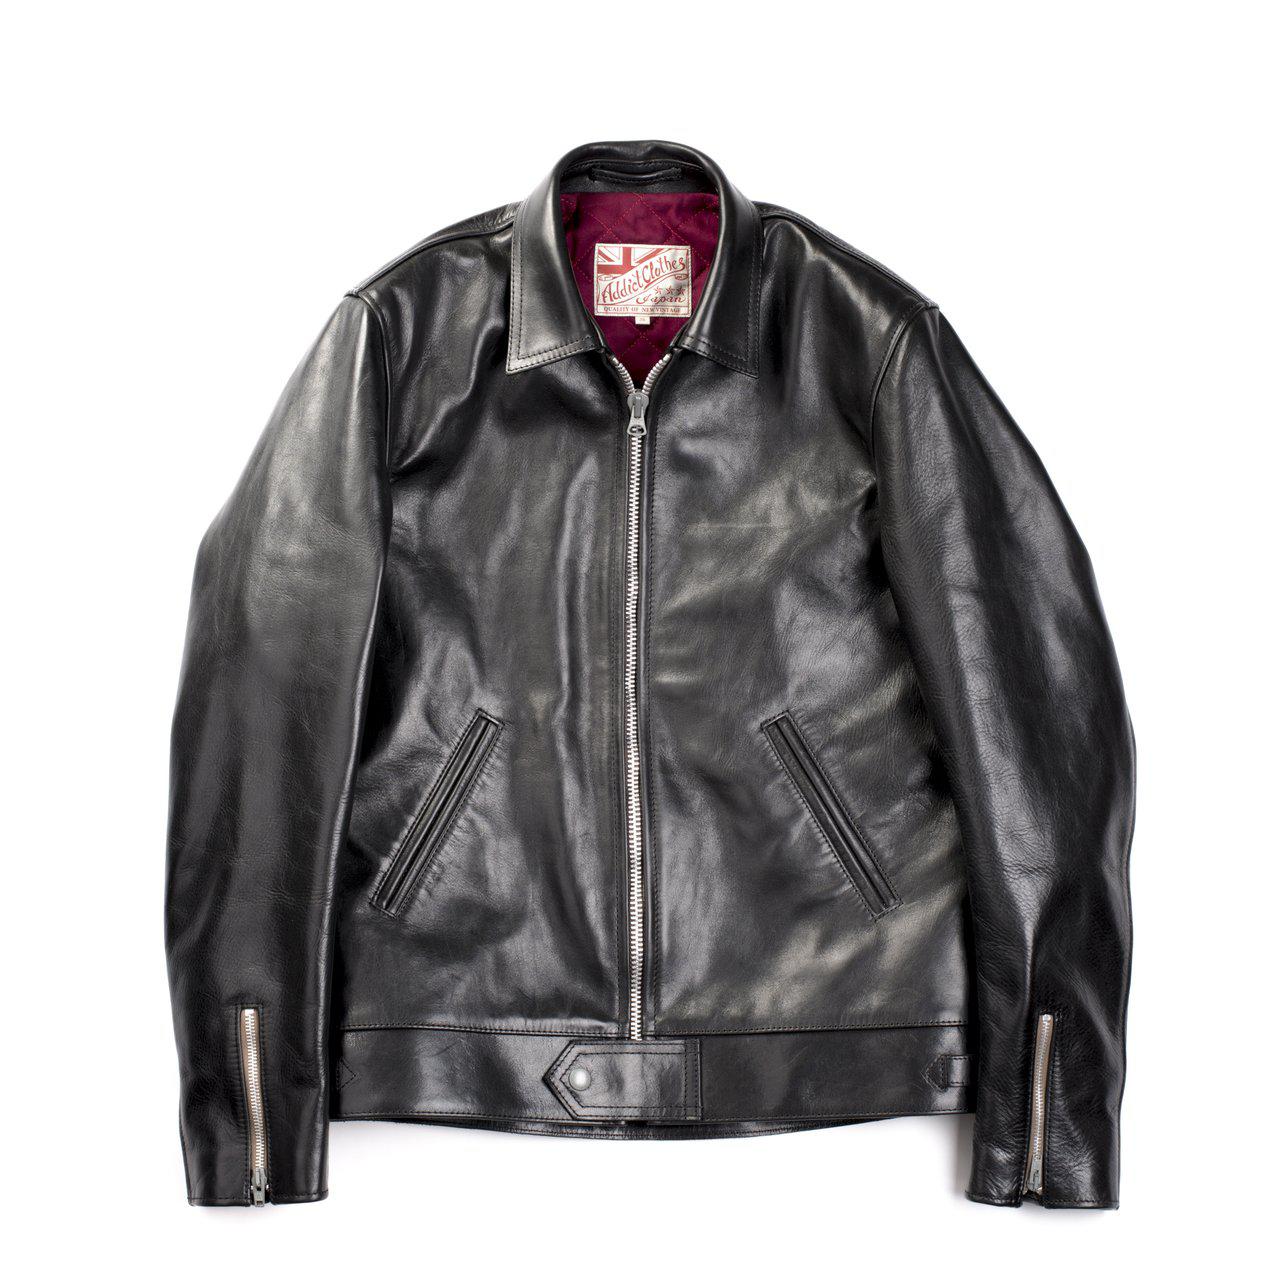 addict-ad-01-horsehide-leather-jacket-black-leather-jacket-motorcycle-clutch-cafe-london